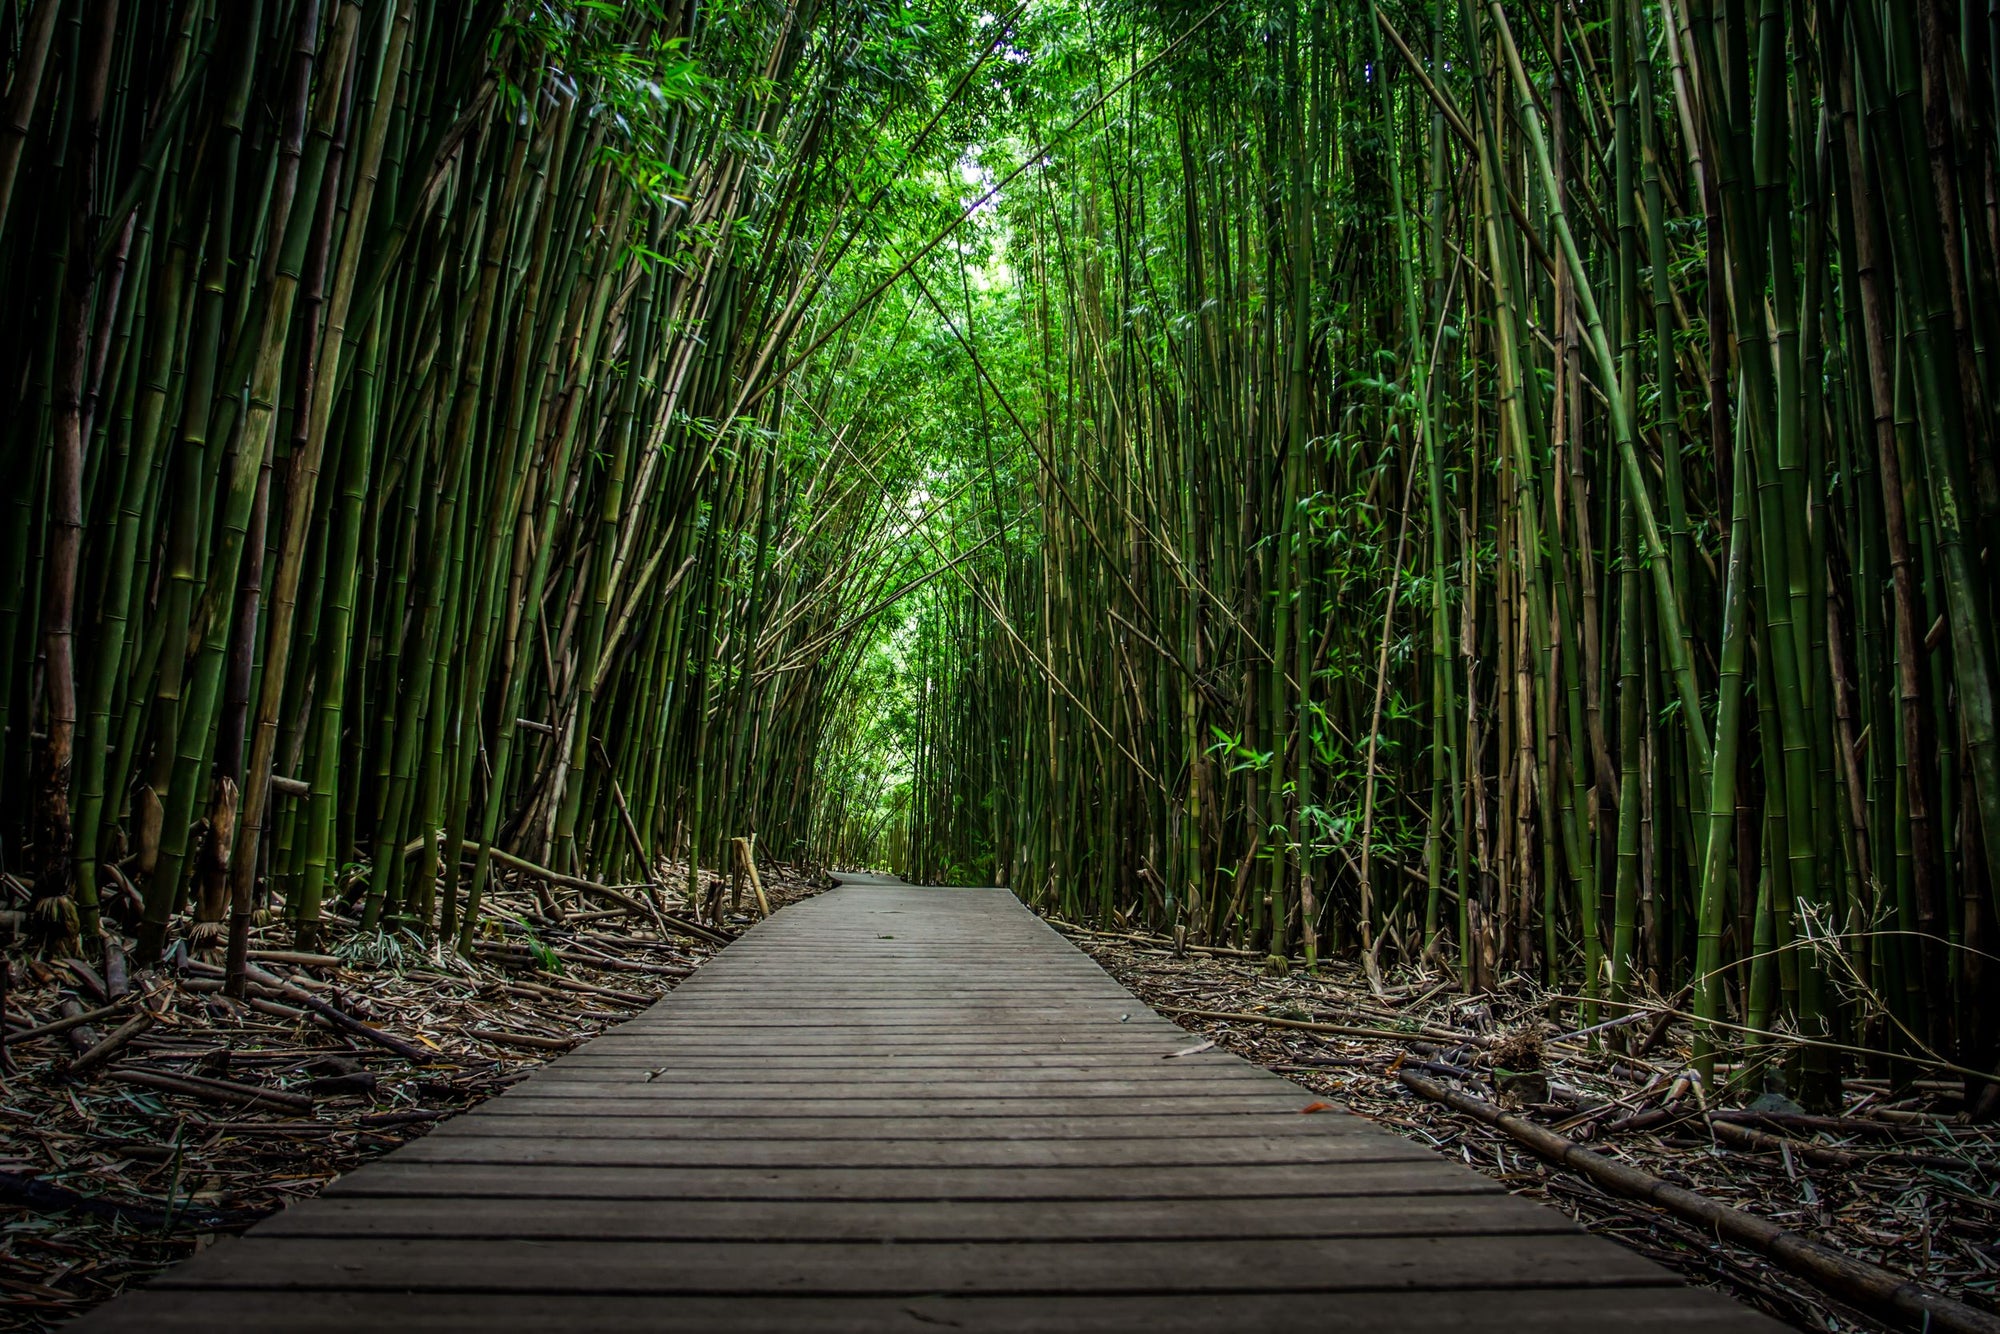 Tall bamboo lines a wooden walkway.